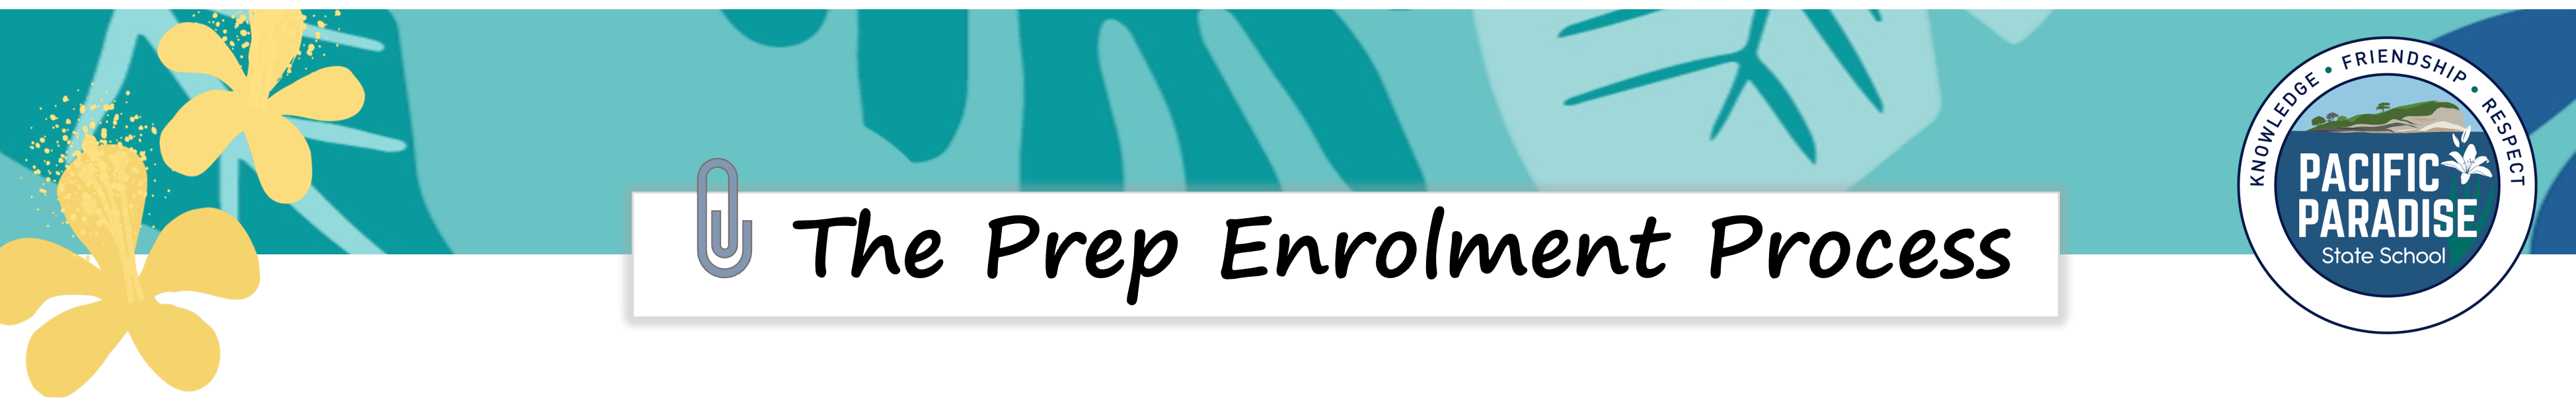 1. The Enrolment Process for Prep with logo.png